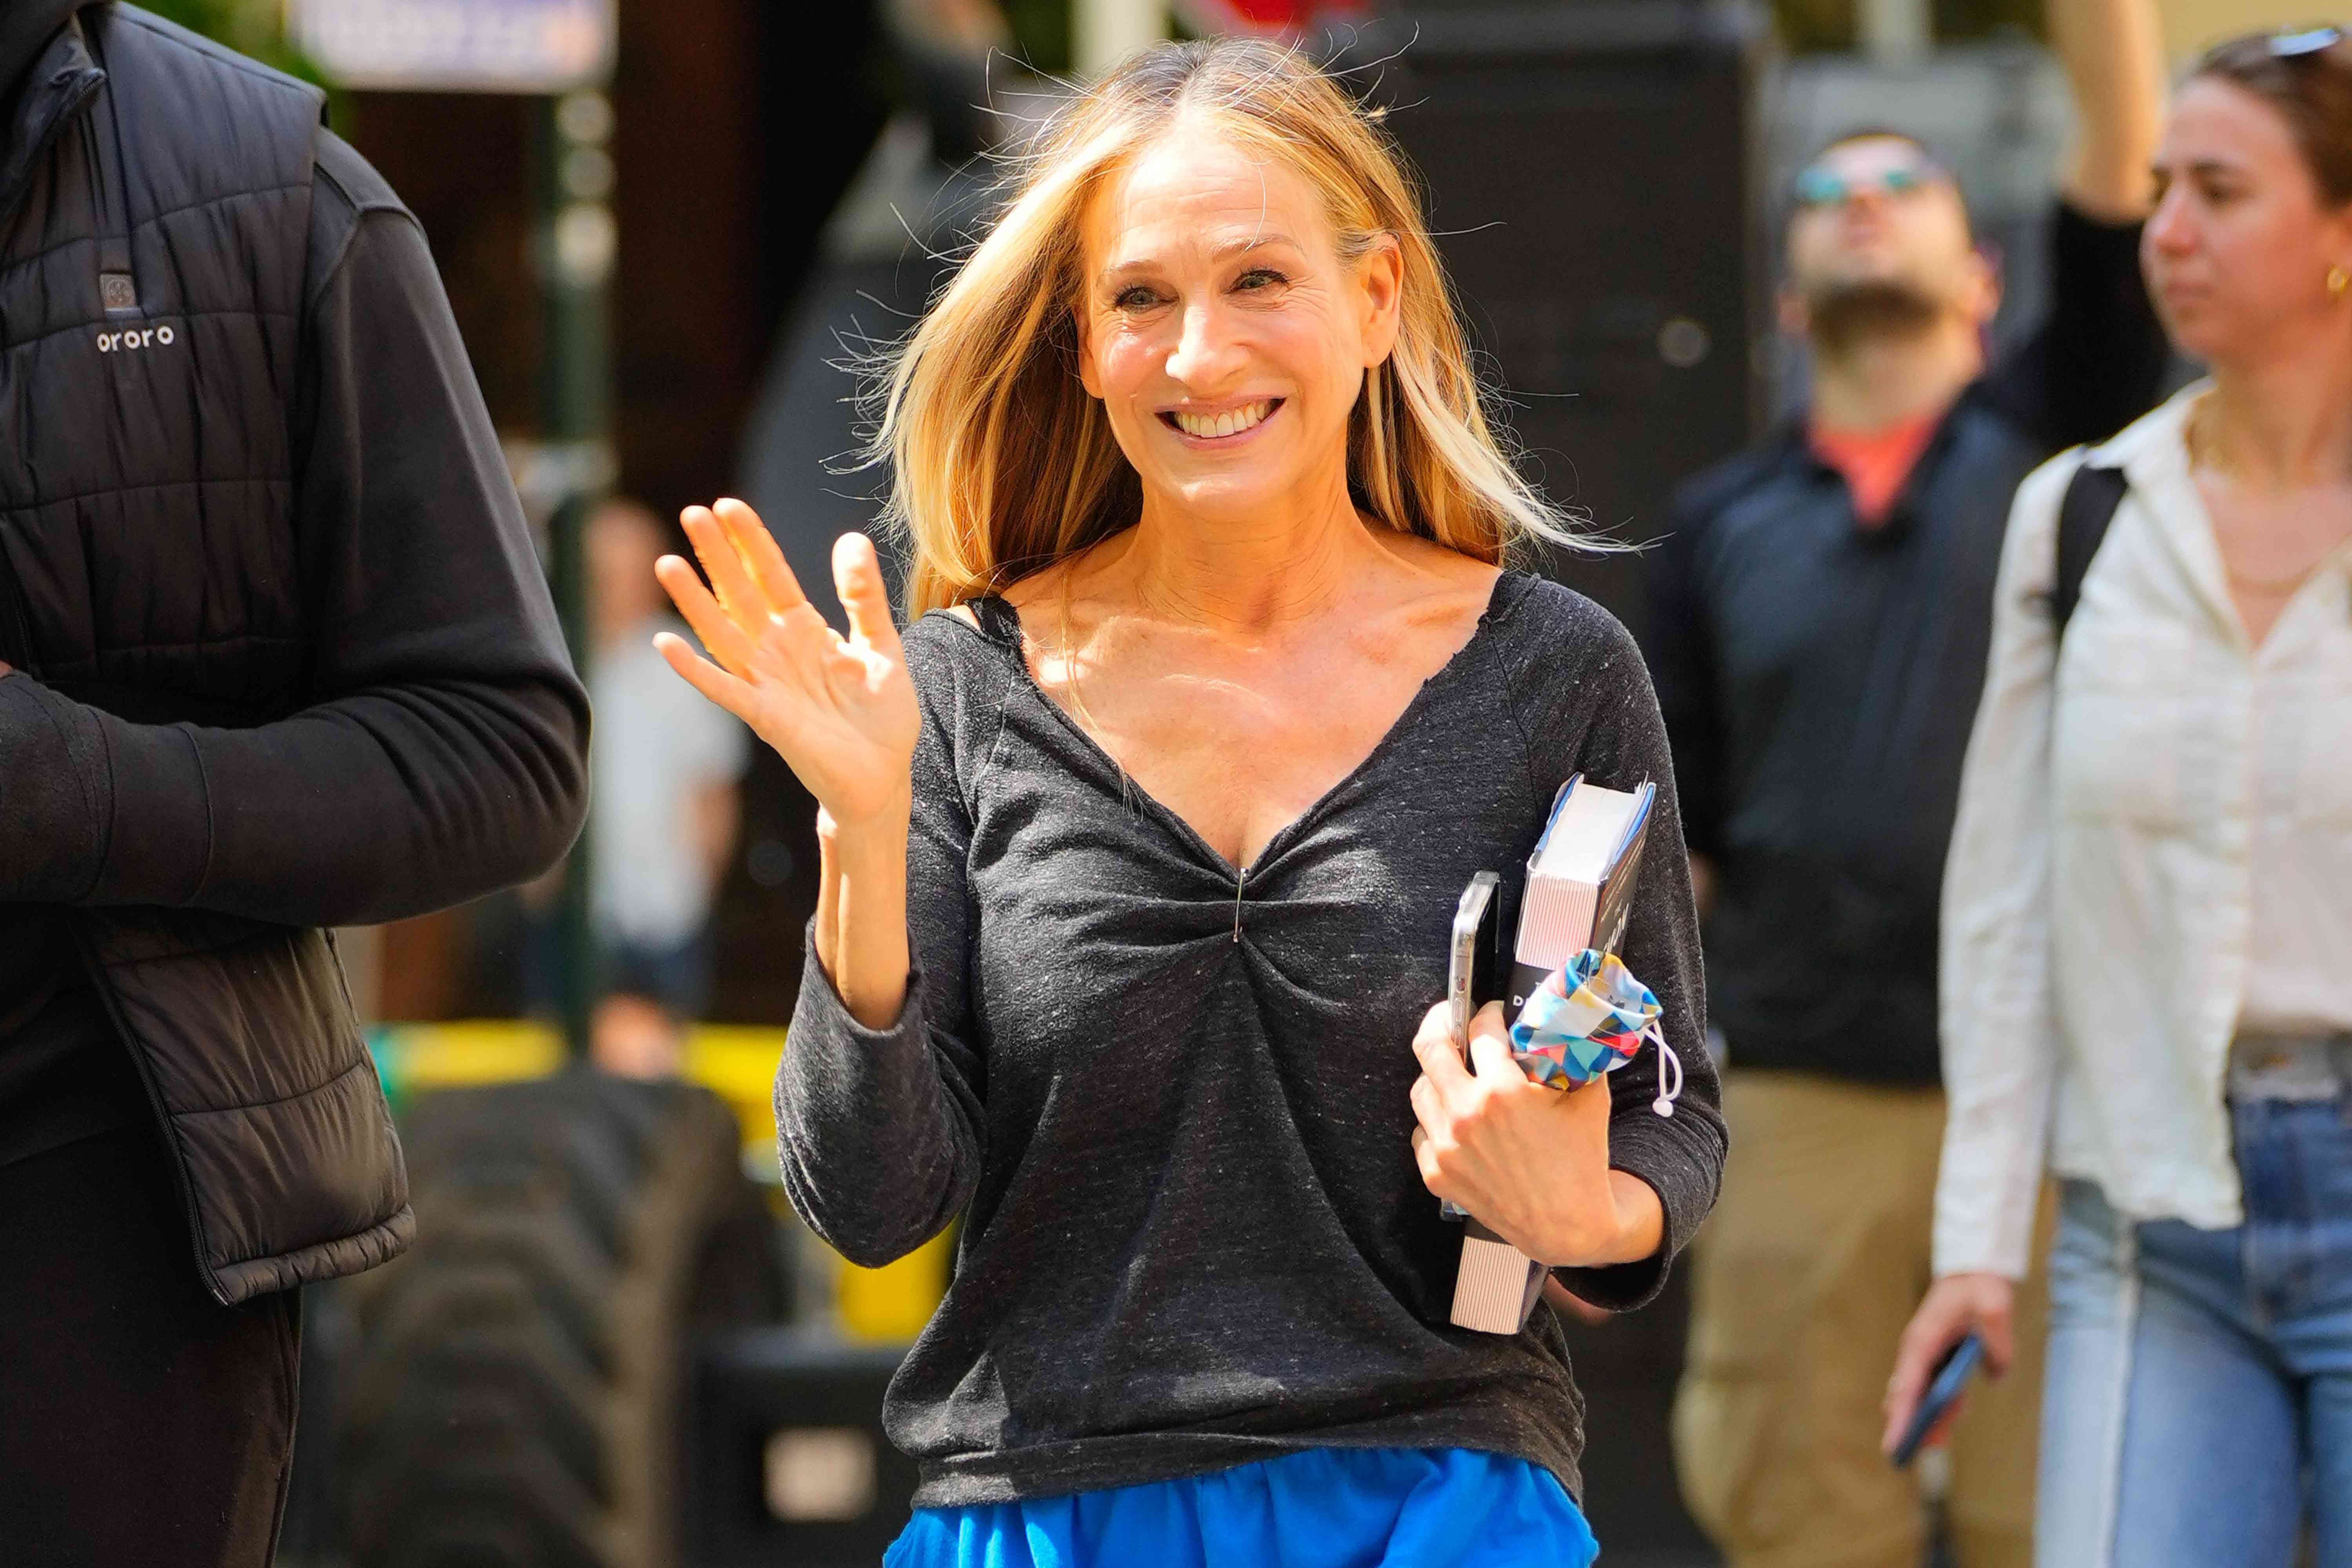 Sarah Jessica Parker's Pajama-Like Trousers from the “AJLT...” Set Are a Comfy Alternative to Jeans for Summer